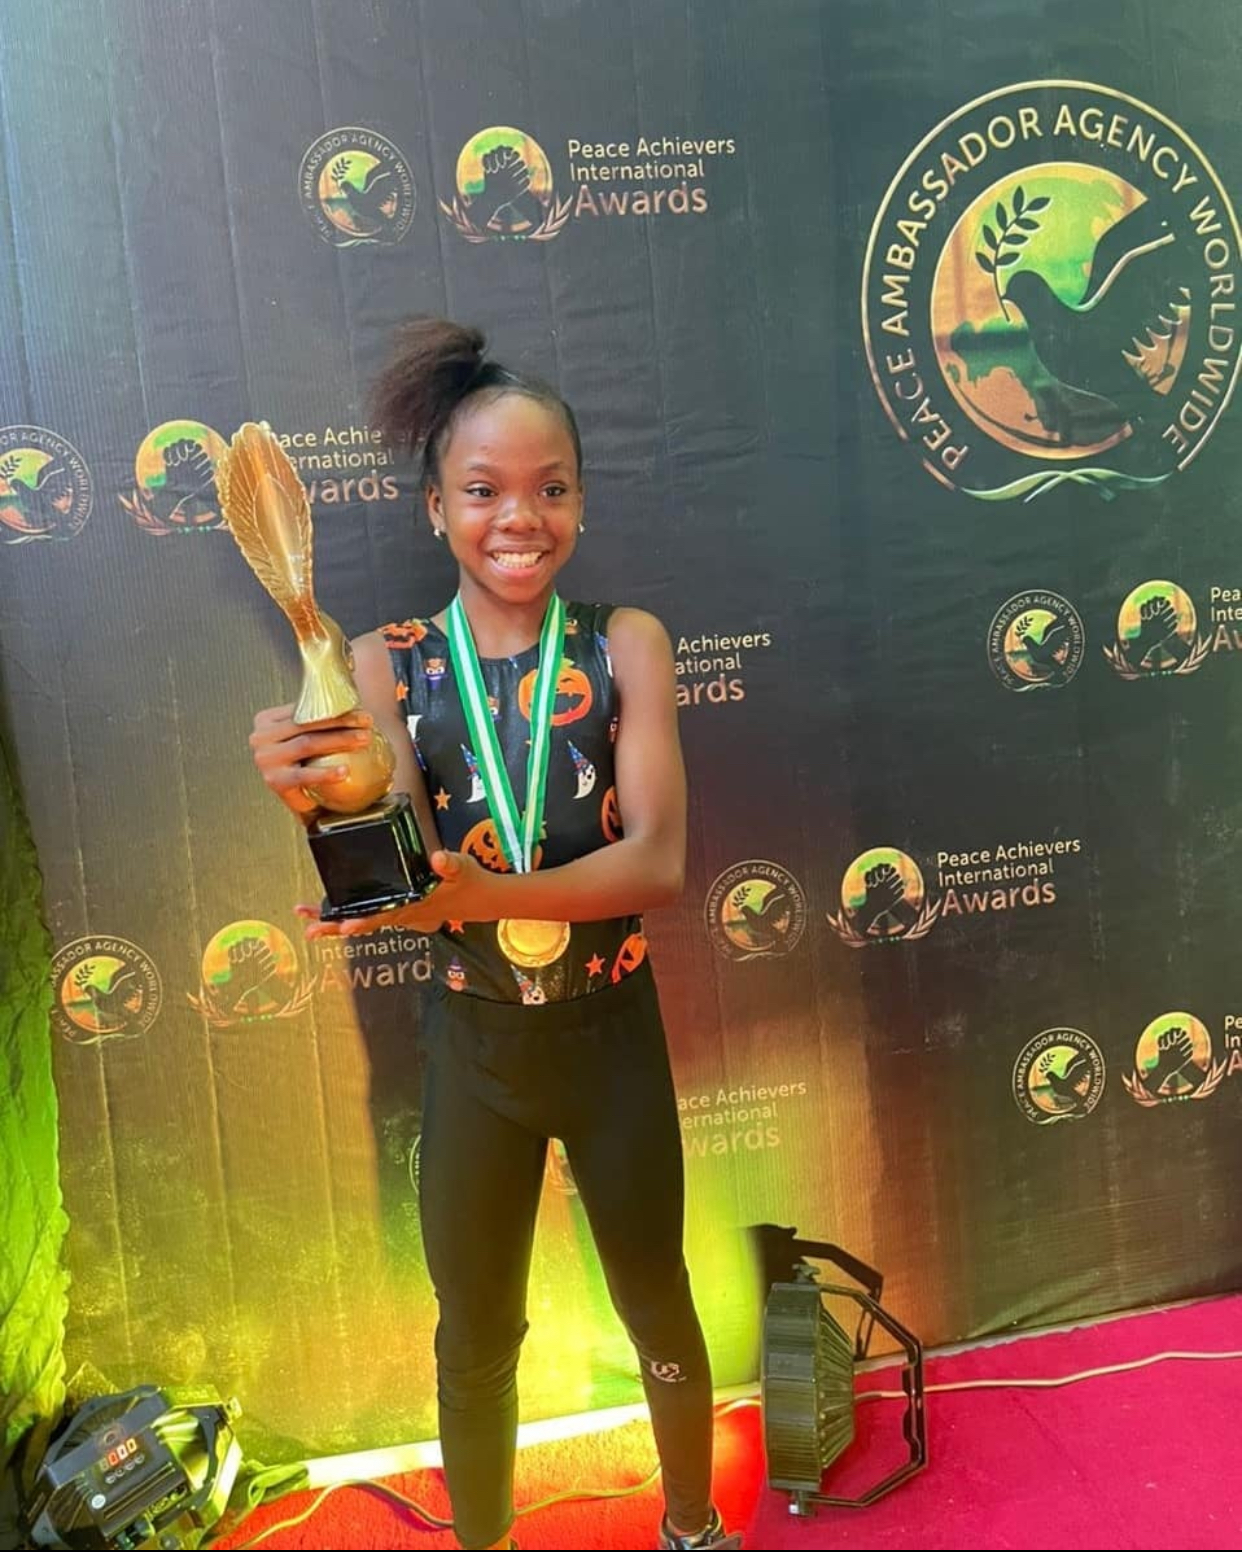 Sports Minister Dare Commends Teenage Gymnast Onusiriuka For Gold Medal Feat